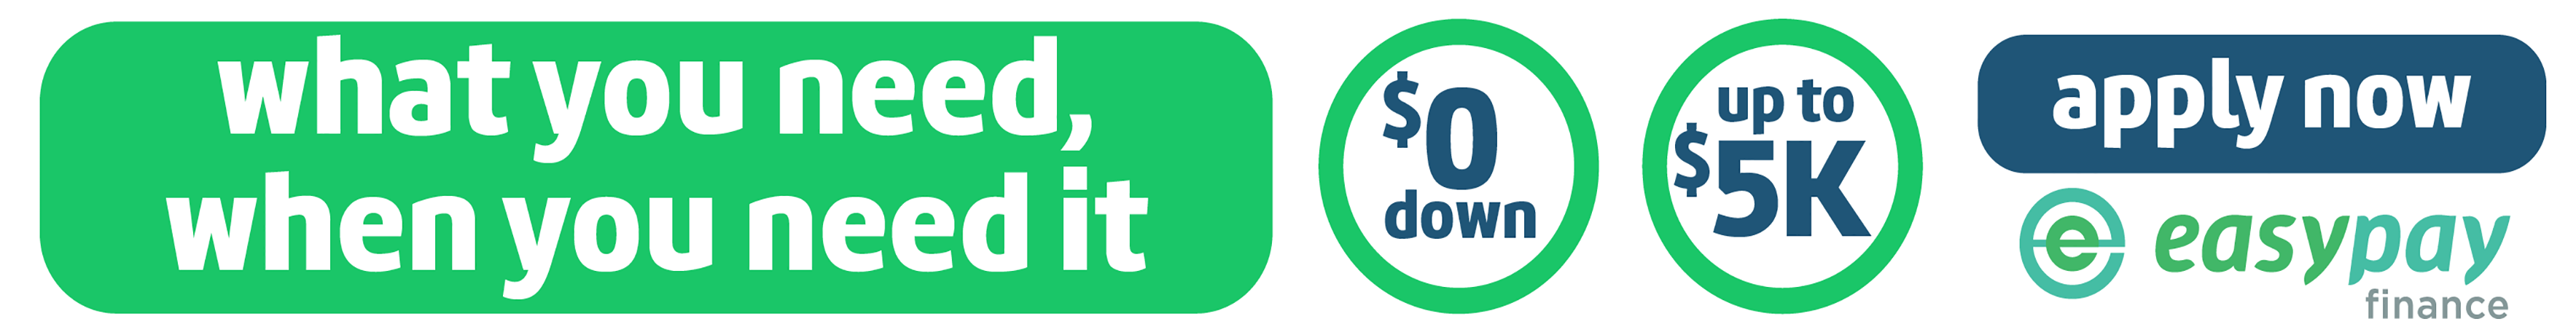 What you need, when you need it $0 down Up to $5k Apply Now at Easypay Finance